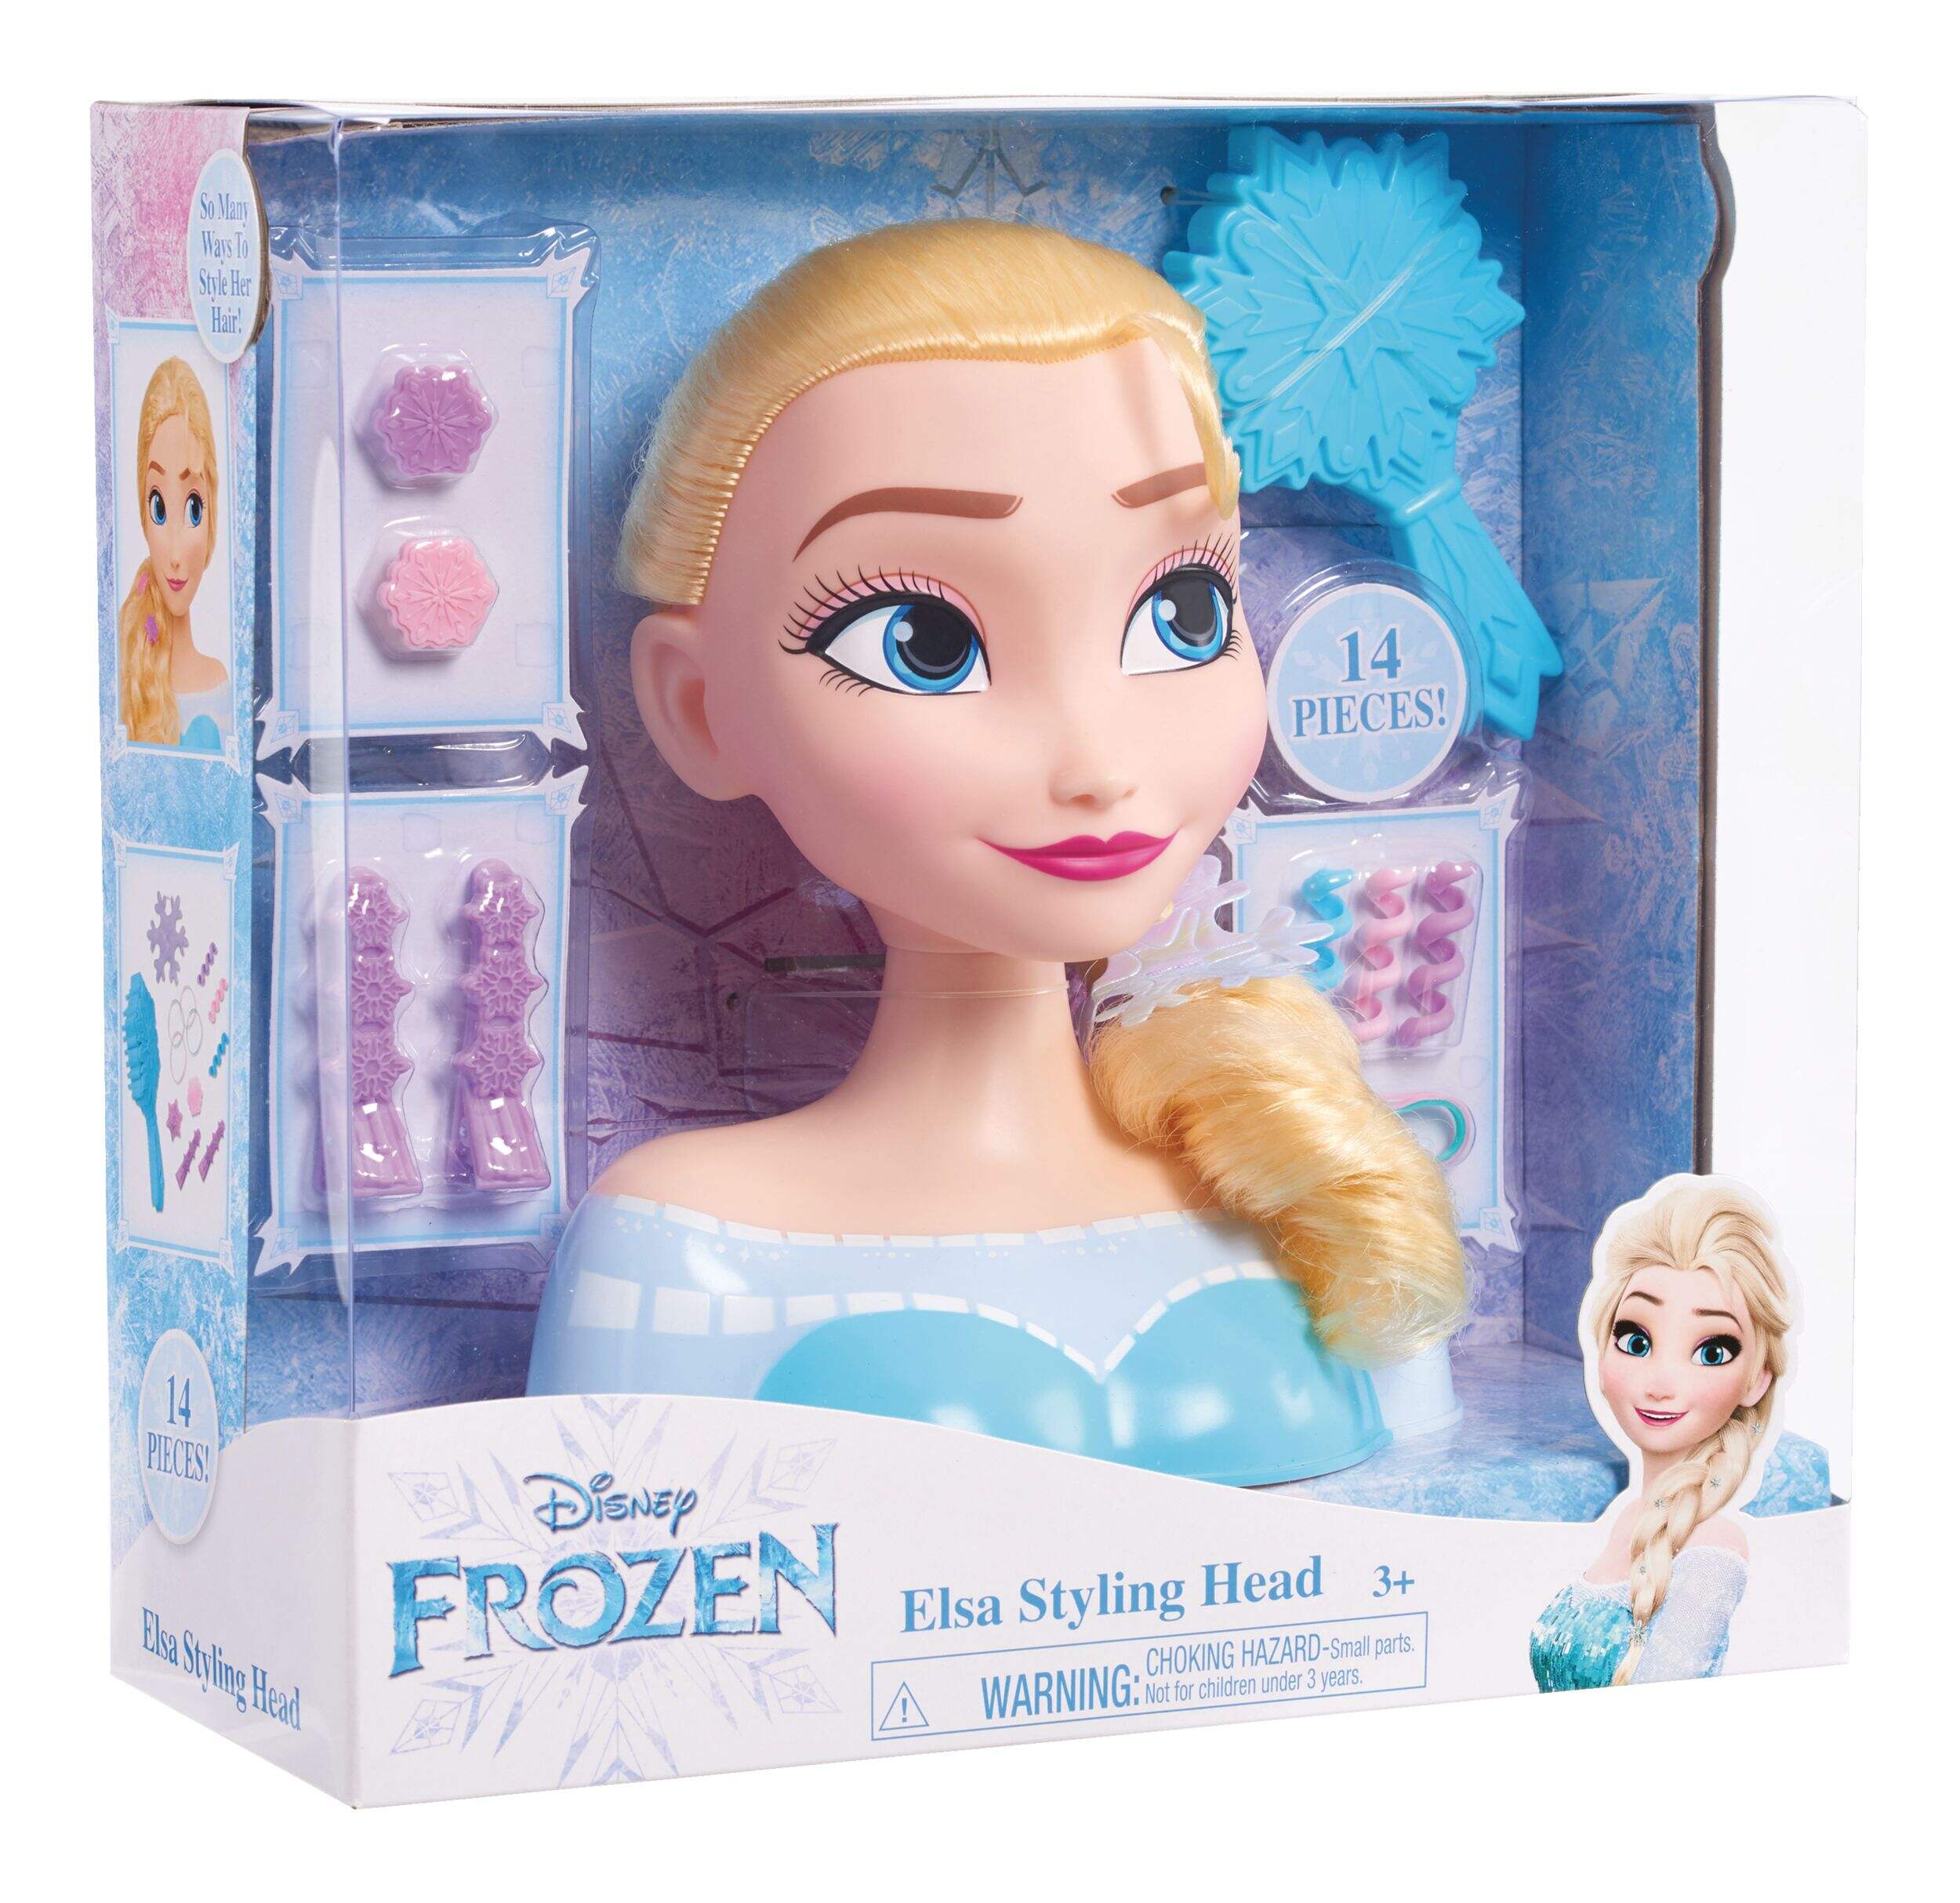 Disney Frozen Elsa Basic Hair Styling Head Toy W14 Pcs Of Accessories Ages 3 Canadian Tire 